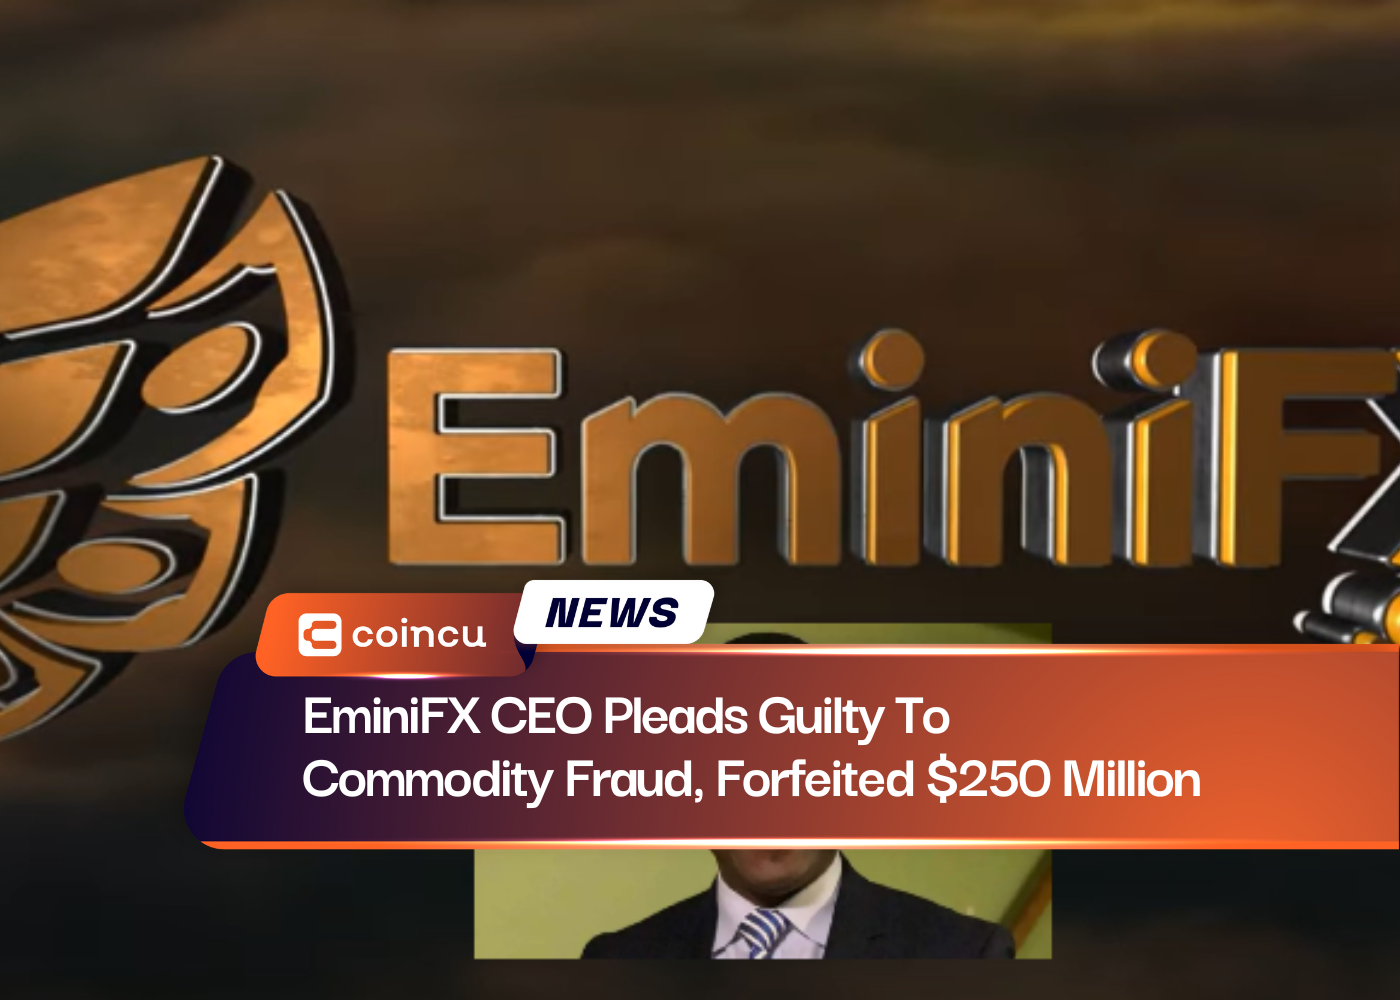 EminiFX CEO Pleads Guilty To Commodity Fraud, Forfeited $250 Million